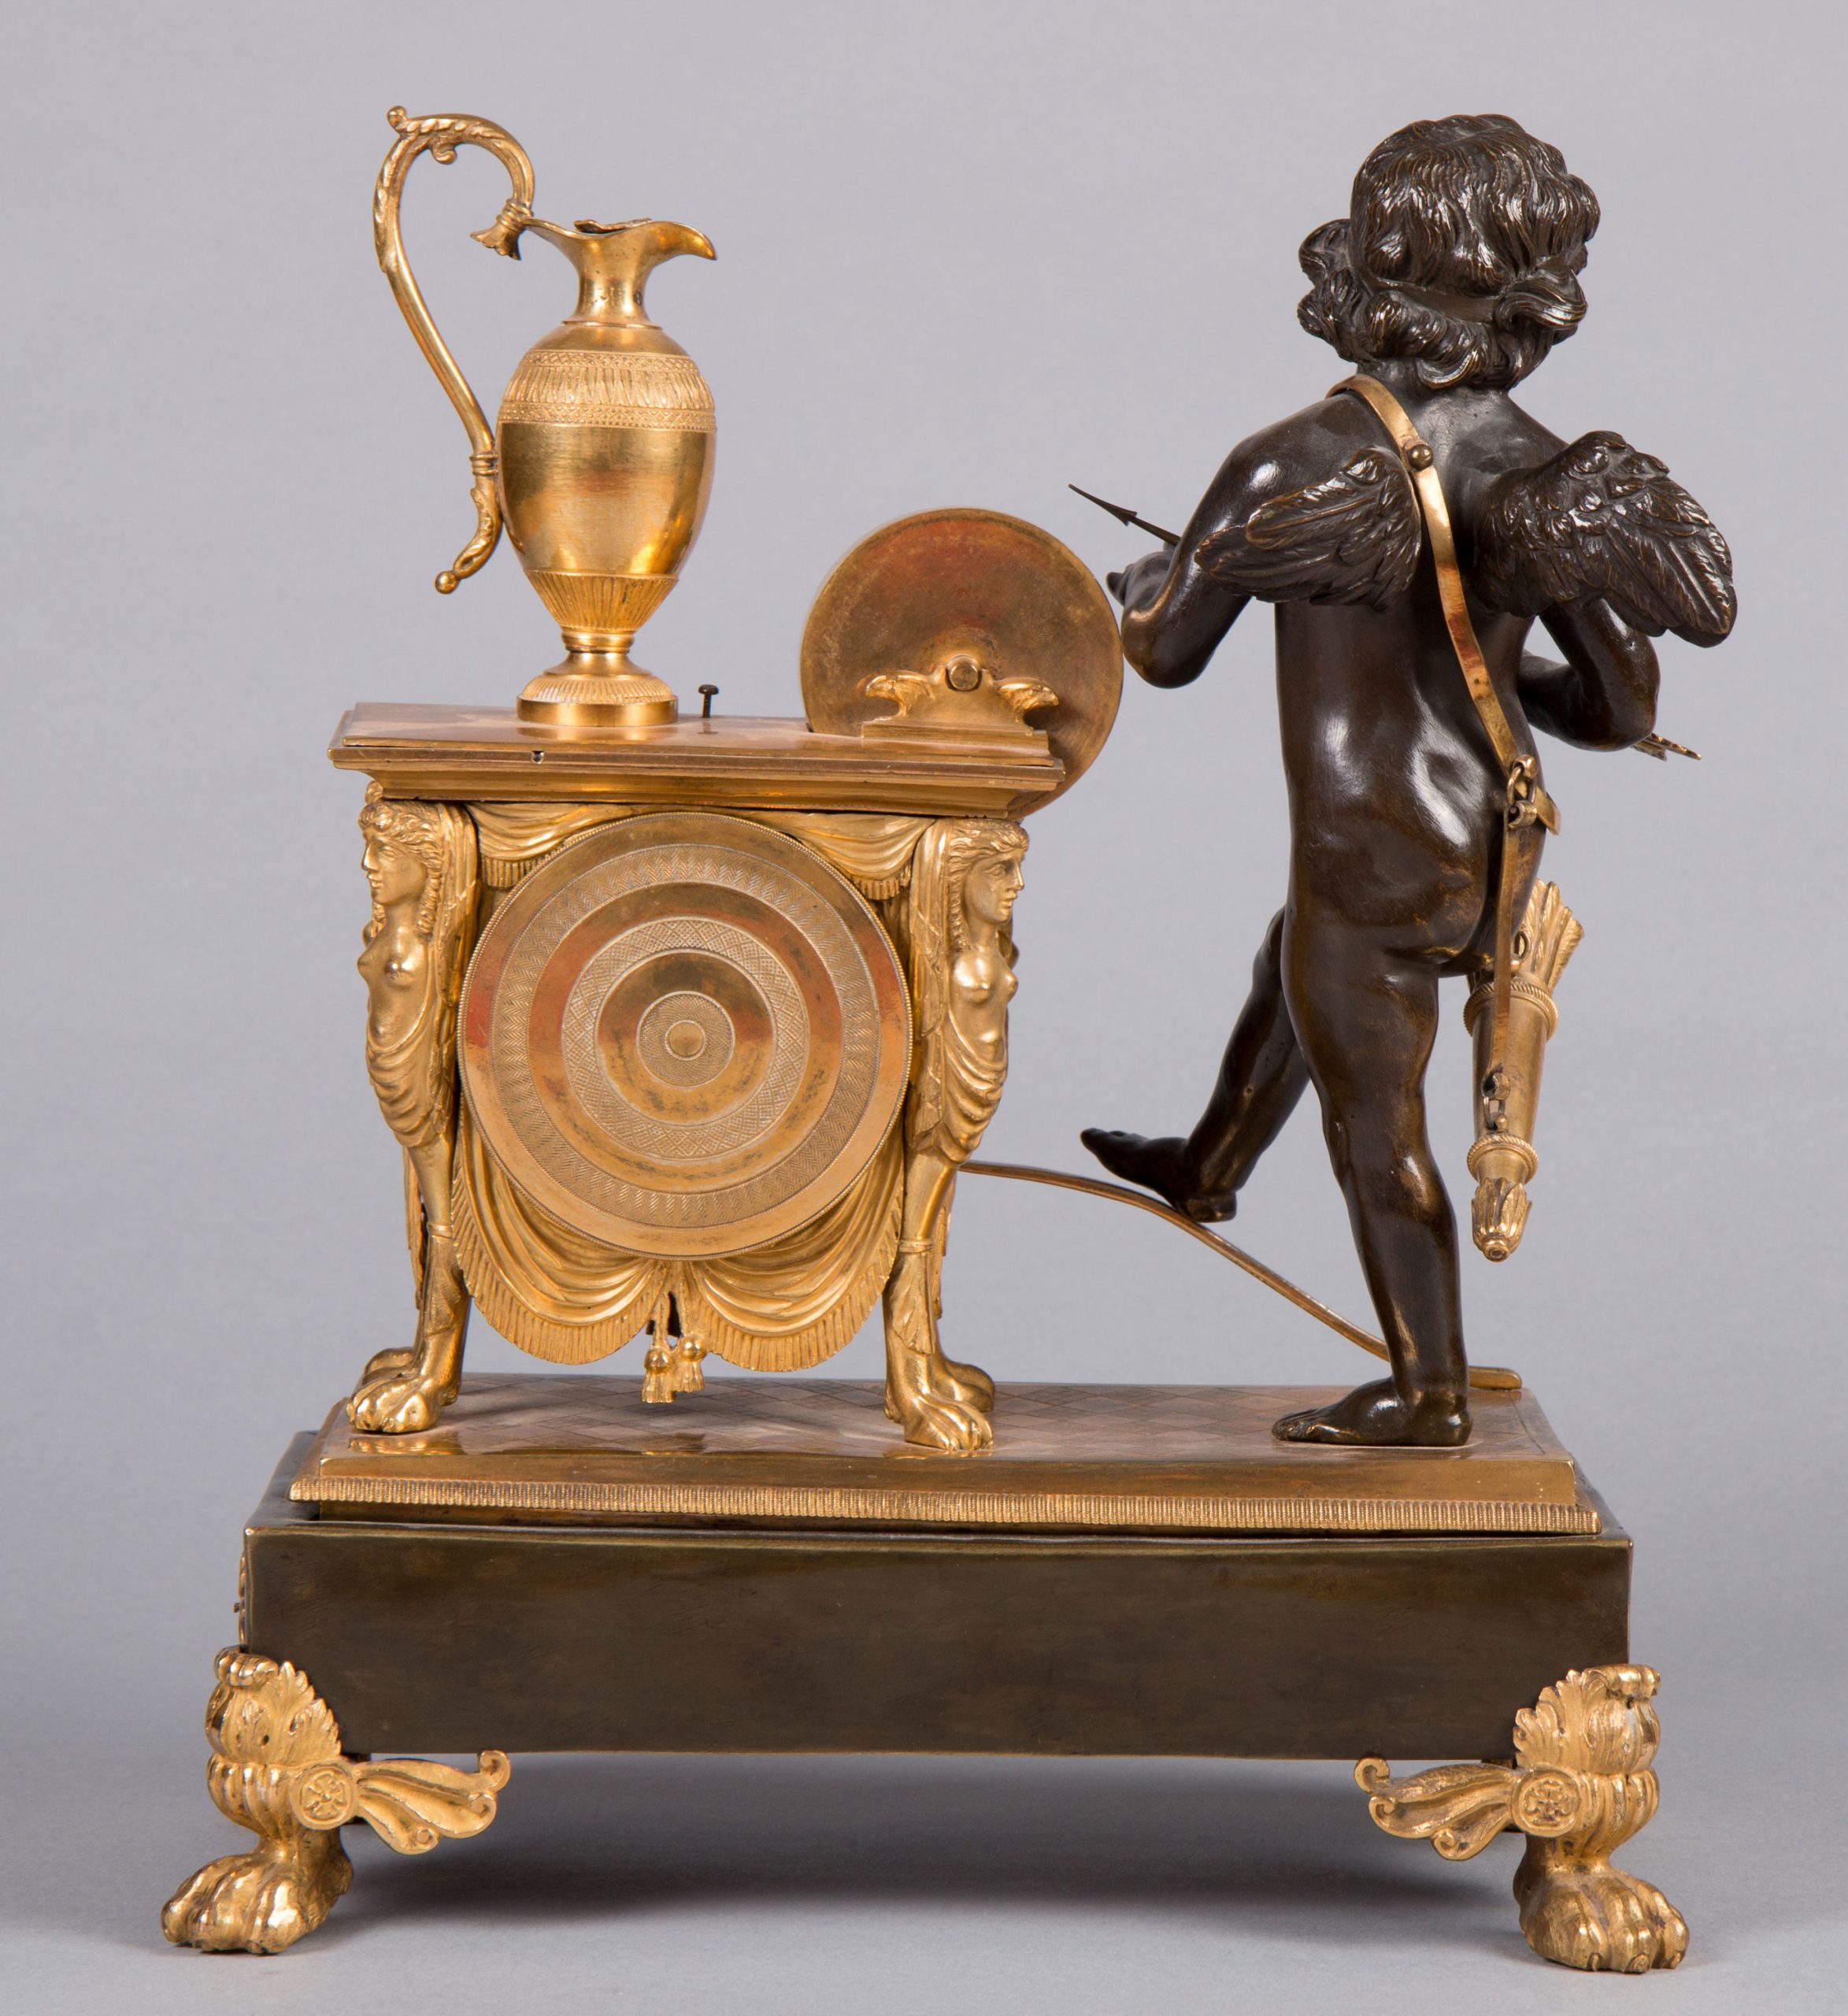 Figural Andréewitch empire “Amor” mantel - Stephan clock